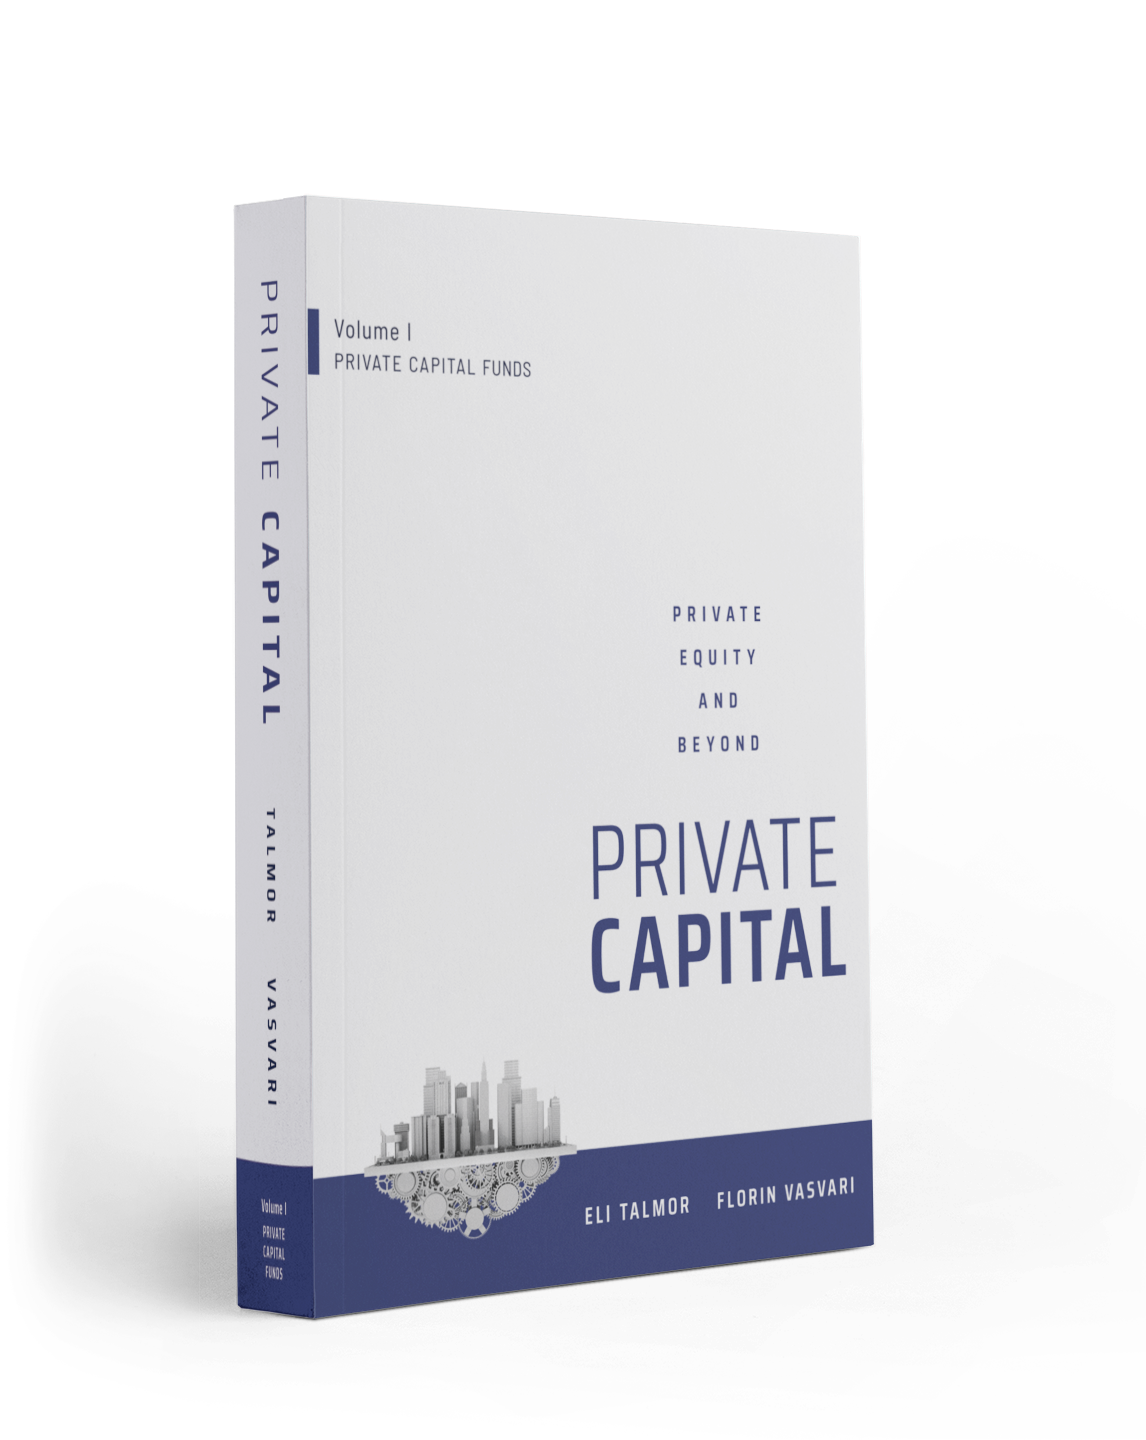 Private equity and beyond - Volume I: Private Capital Funds